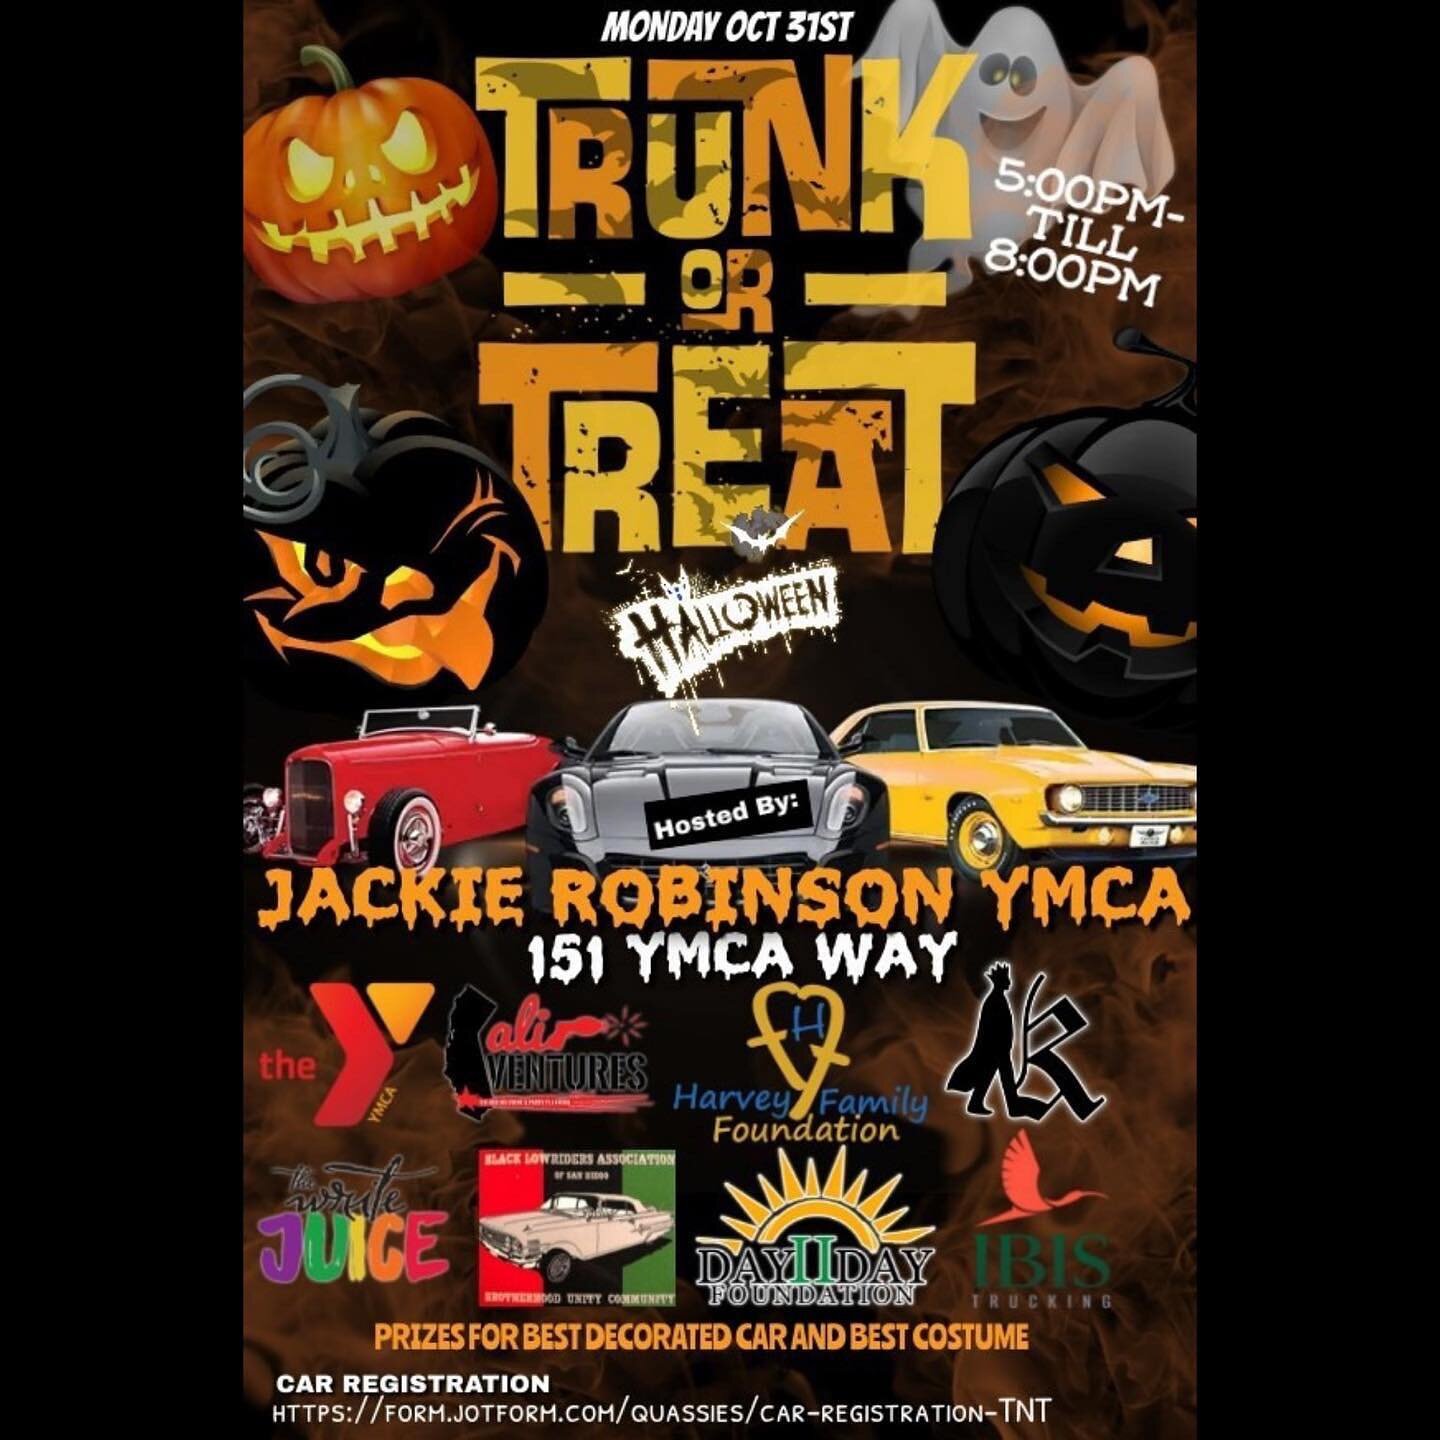 Come on down and enjoy this family friendly Halloween event for the community. We will be having vendors games prizes and even a haunted house&hellip; come dressed in your most creative costumes for the contest we will also be needing cars for the tr